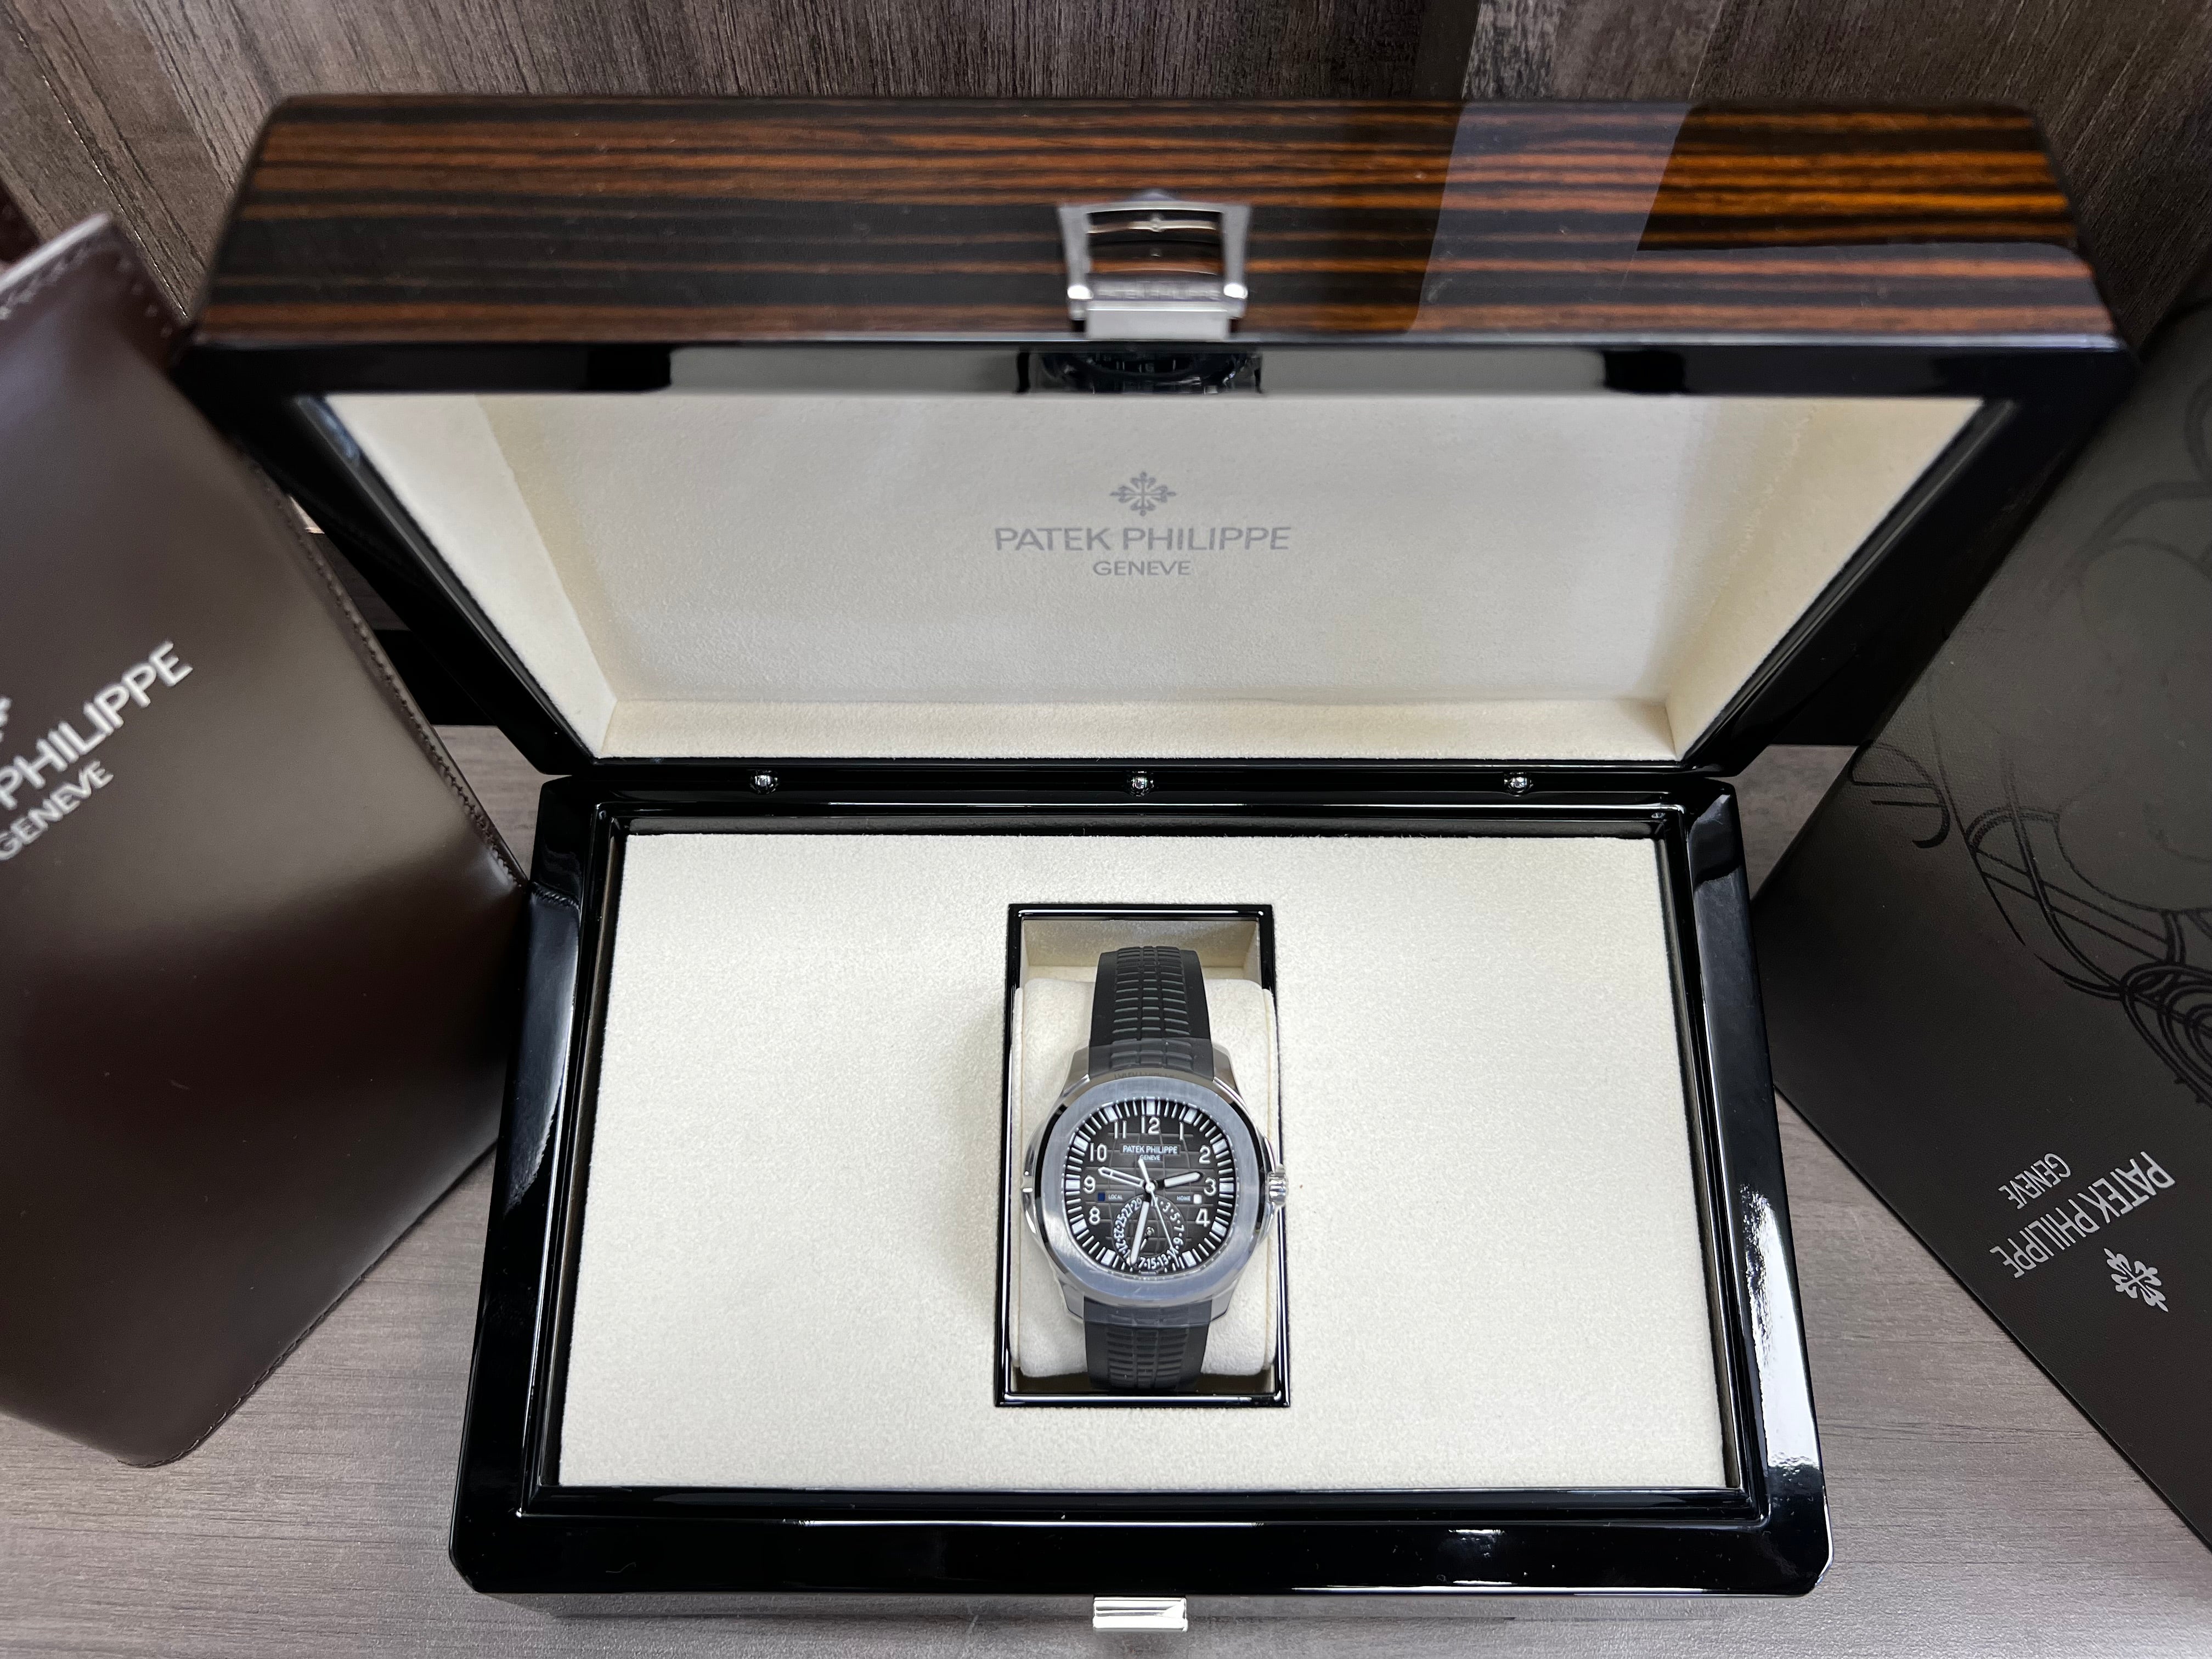 Patek Philippe Aquanaut Travel Time Stainless Steel 5164A-001